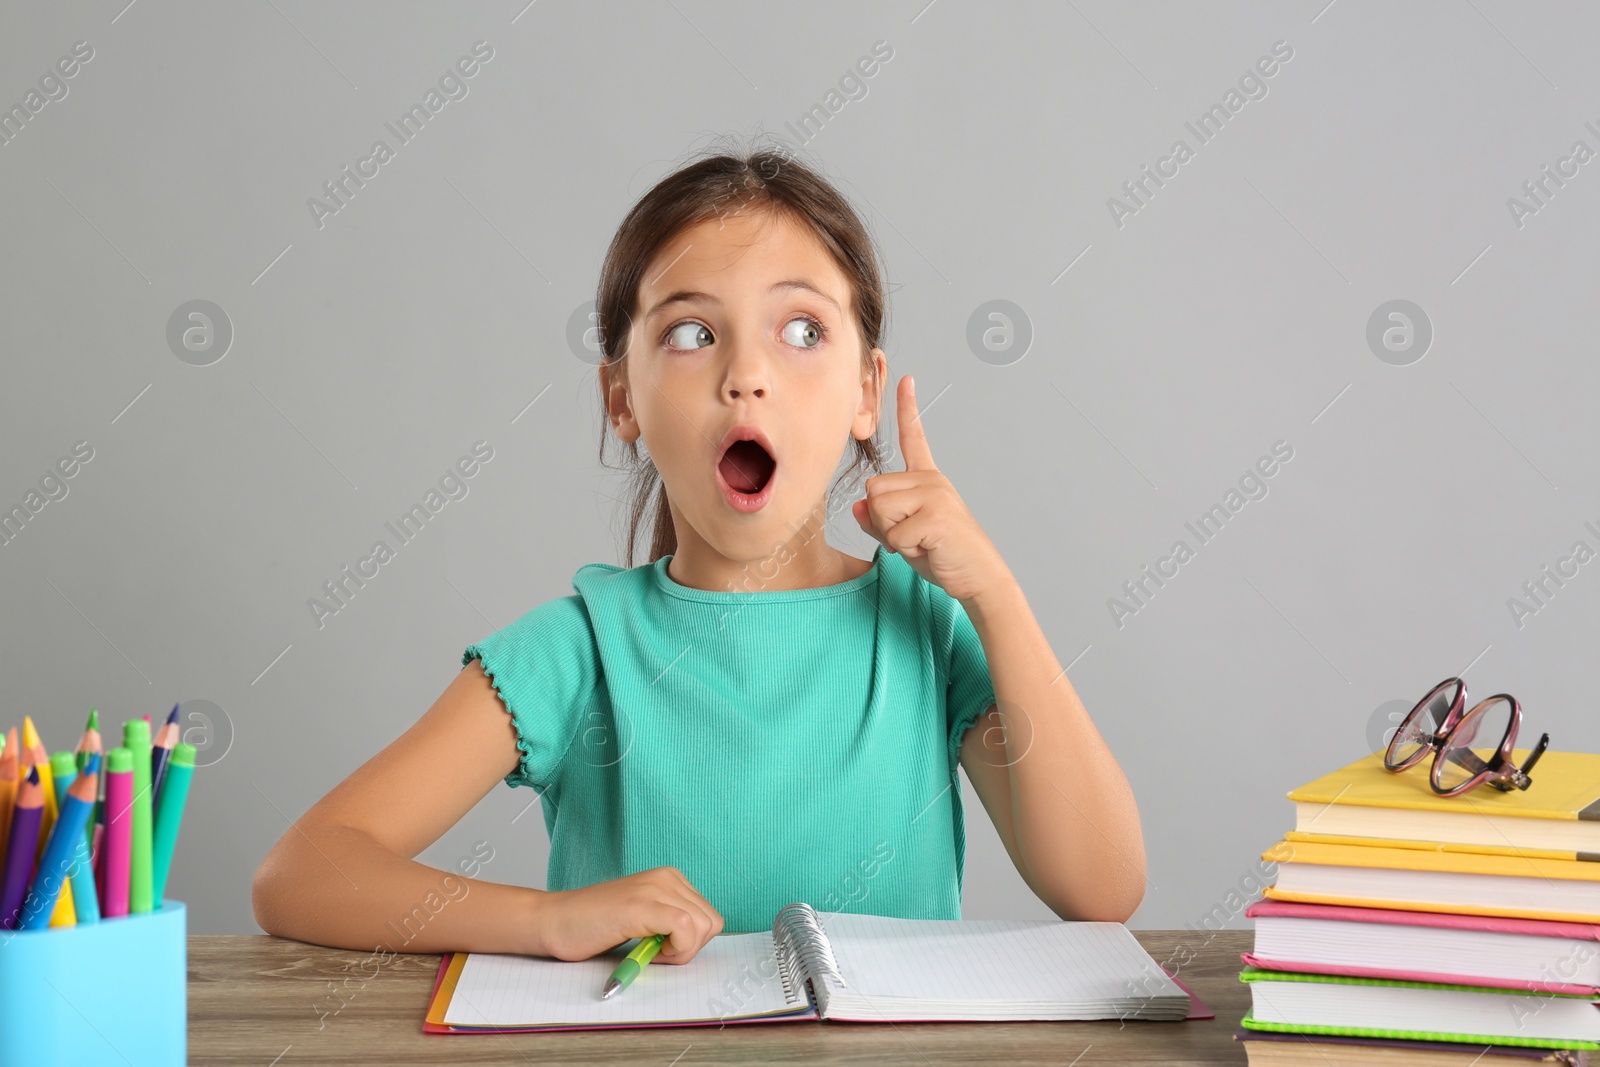 Photo of Emotional little girl doing homework at table on grey background